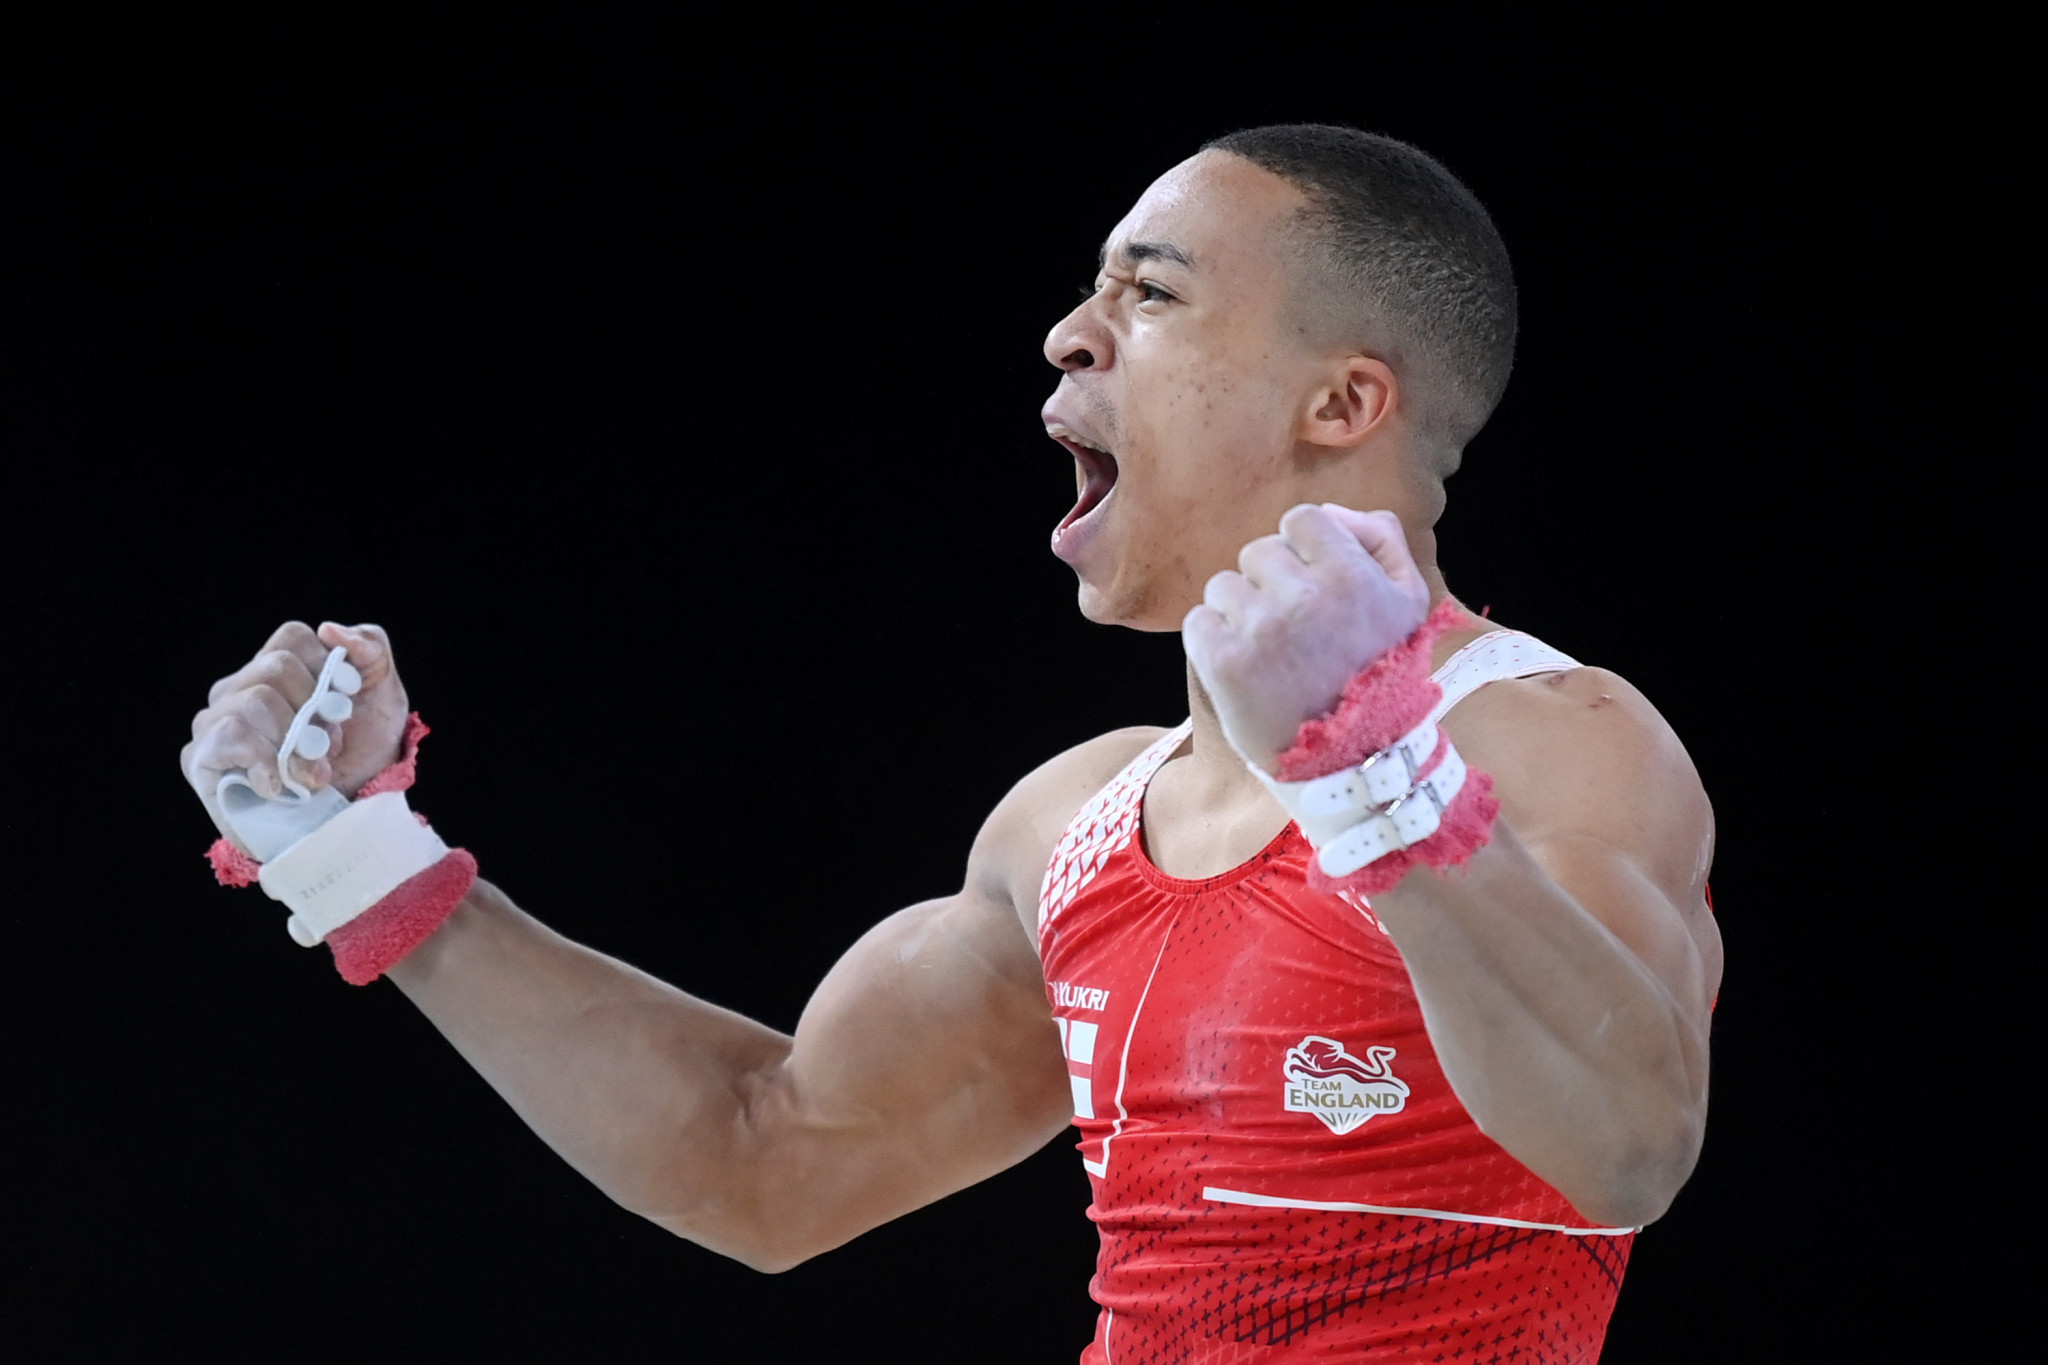 Birmingham-born Fraser helps inspire England to dominant team gymnastics gold at Commonwealth Games